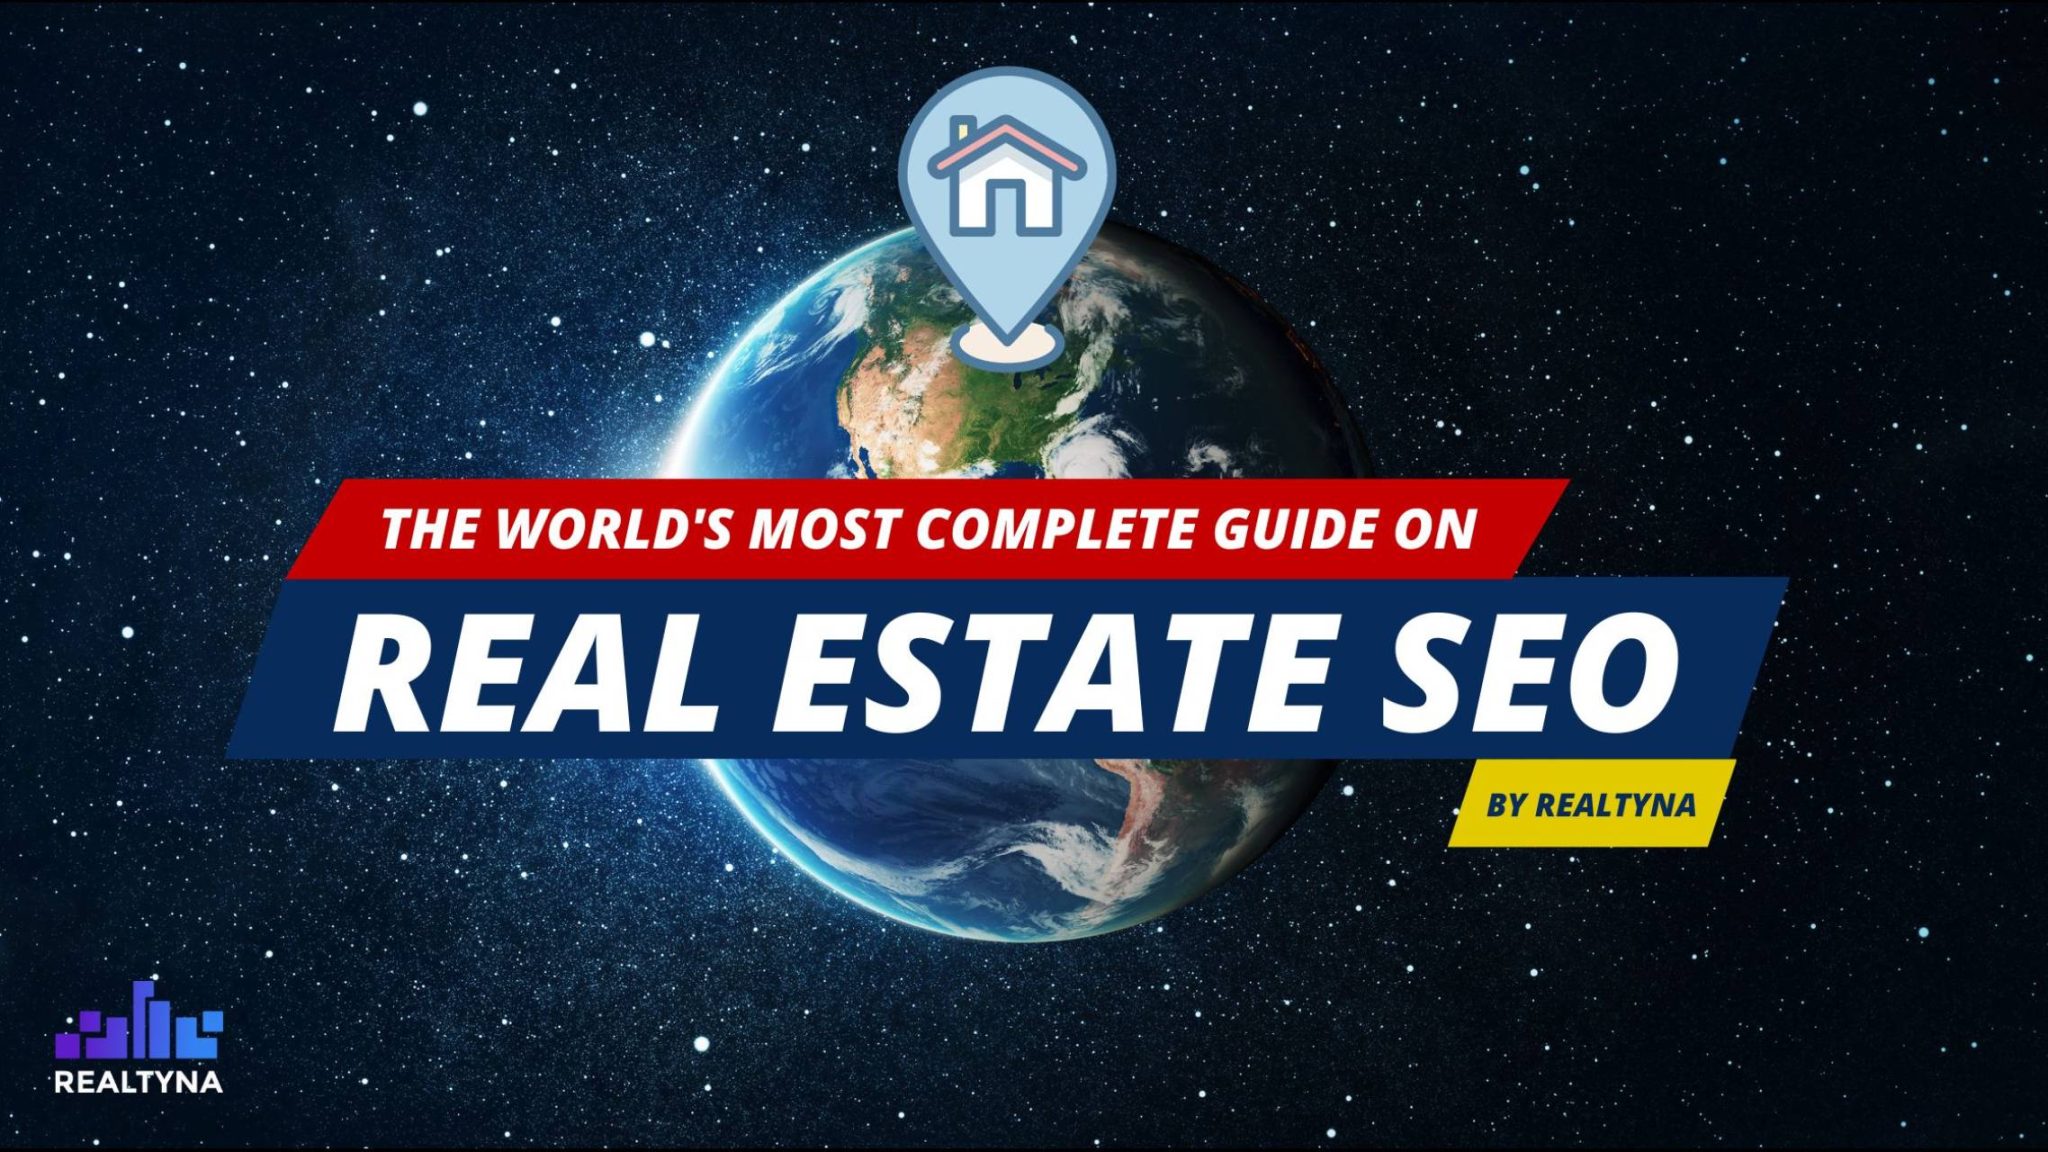 The-Worlds-Most-Complete-Guide-on-Real-Estate-SEO-2048x1152.jpg